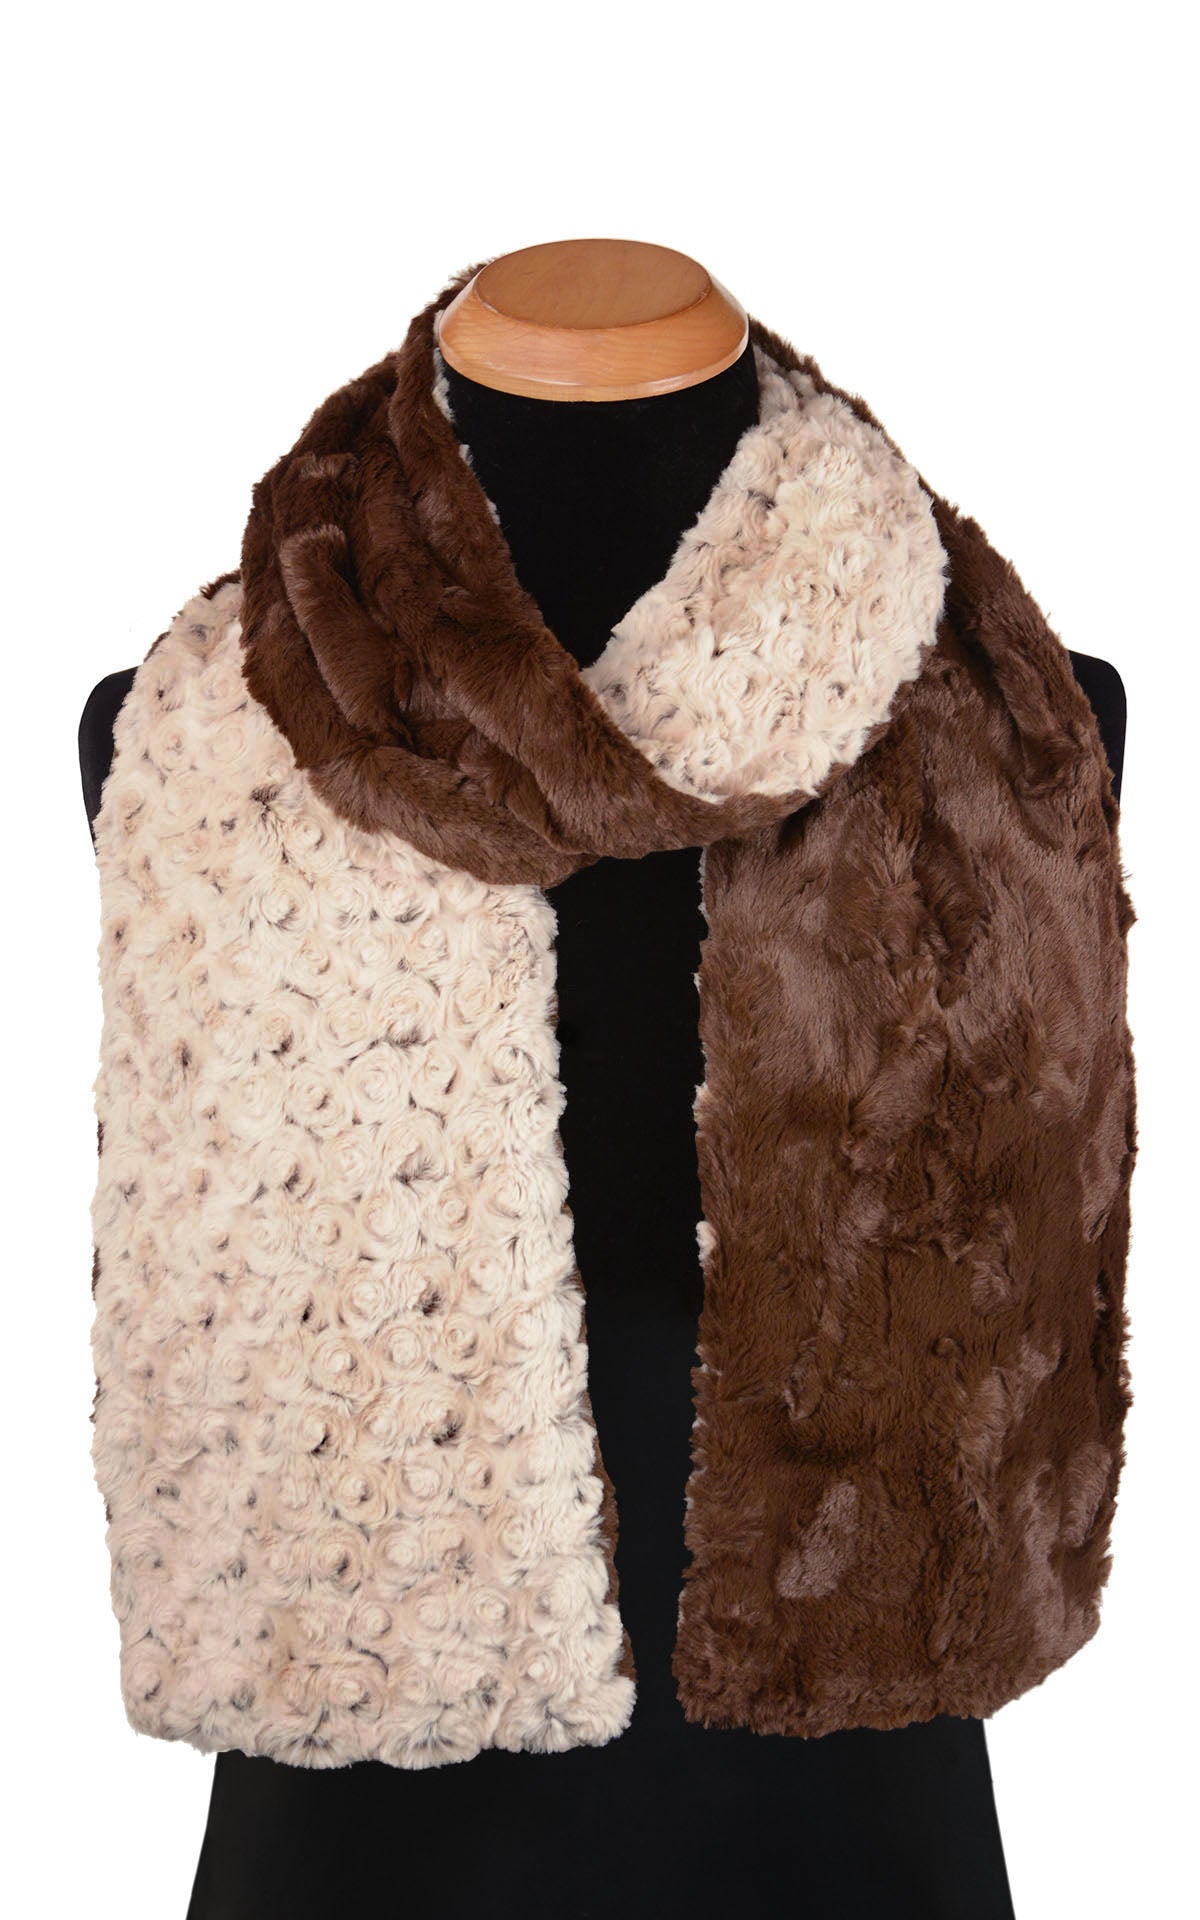 Classic Two-Tone Standard Size Scarf | Rosebud Faux Fur in Brown with Cuddly Chocolate | handmade in Seattle WA USA by Pandemonium Millinery